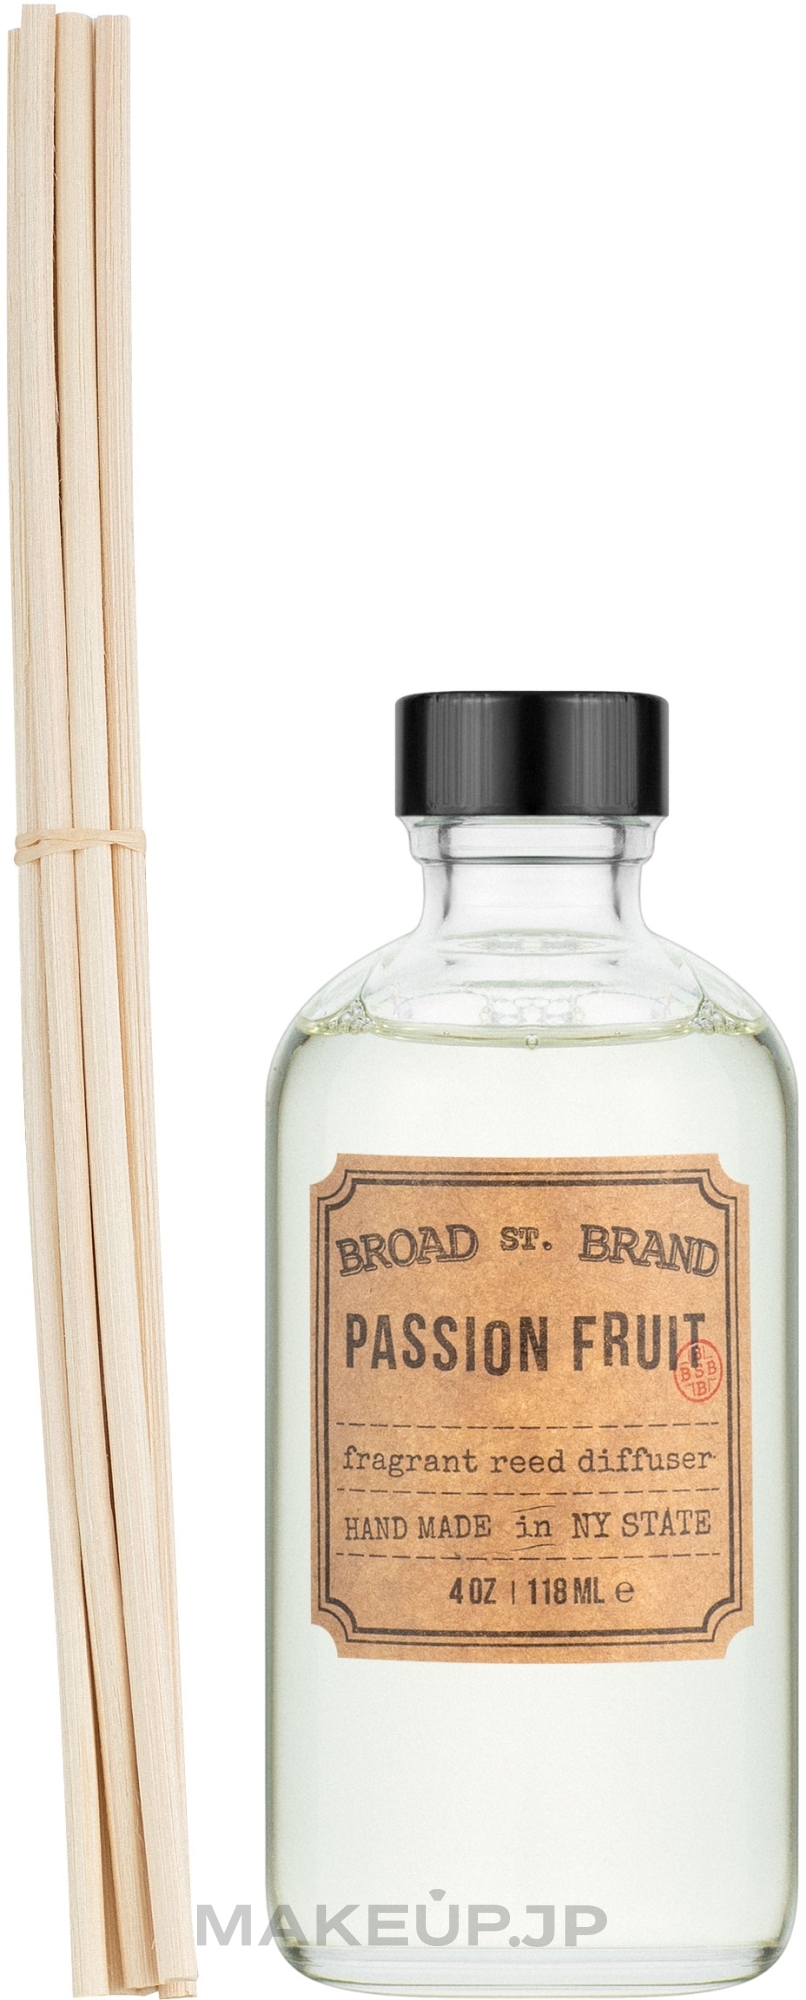 Kobo Broad St. Brand Passion Fruit - Reed Diffuser — photo 118 ml